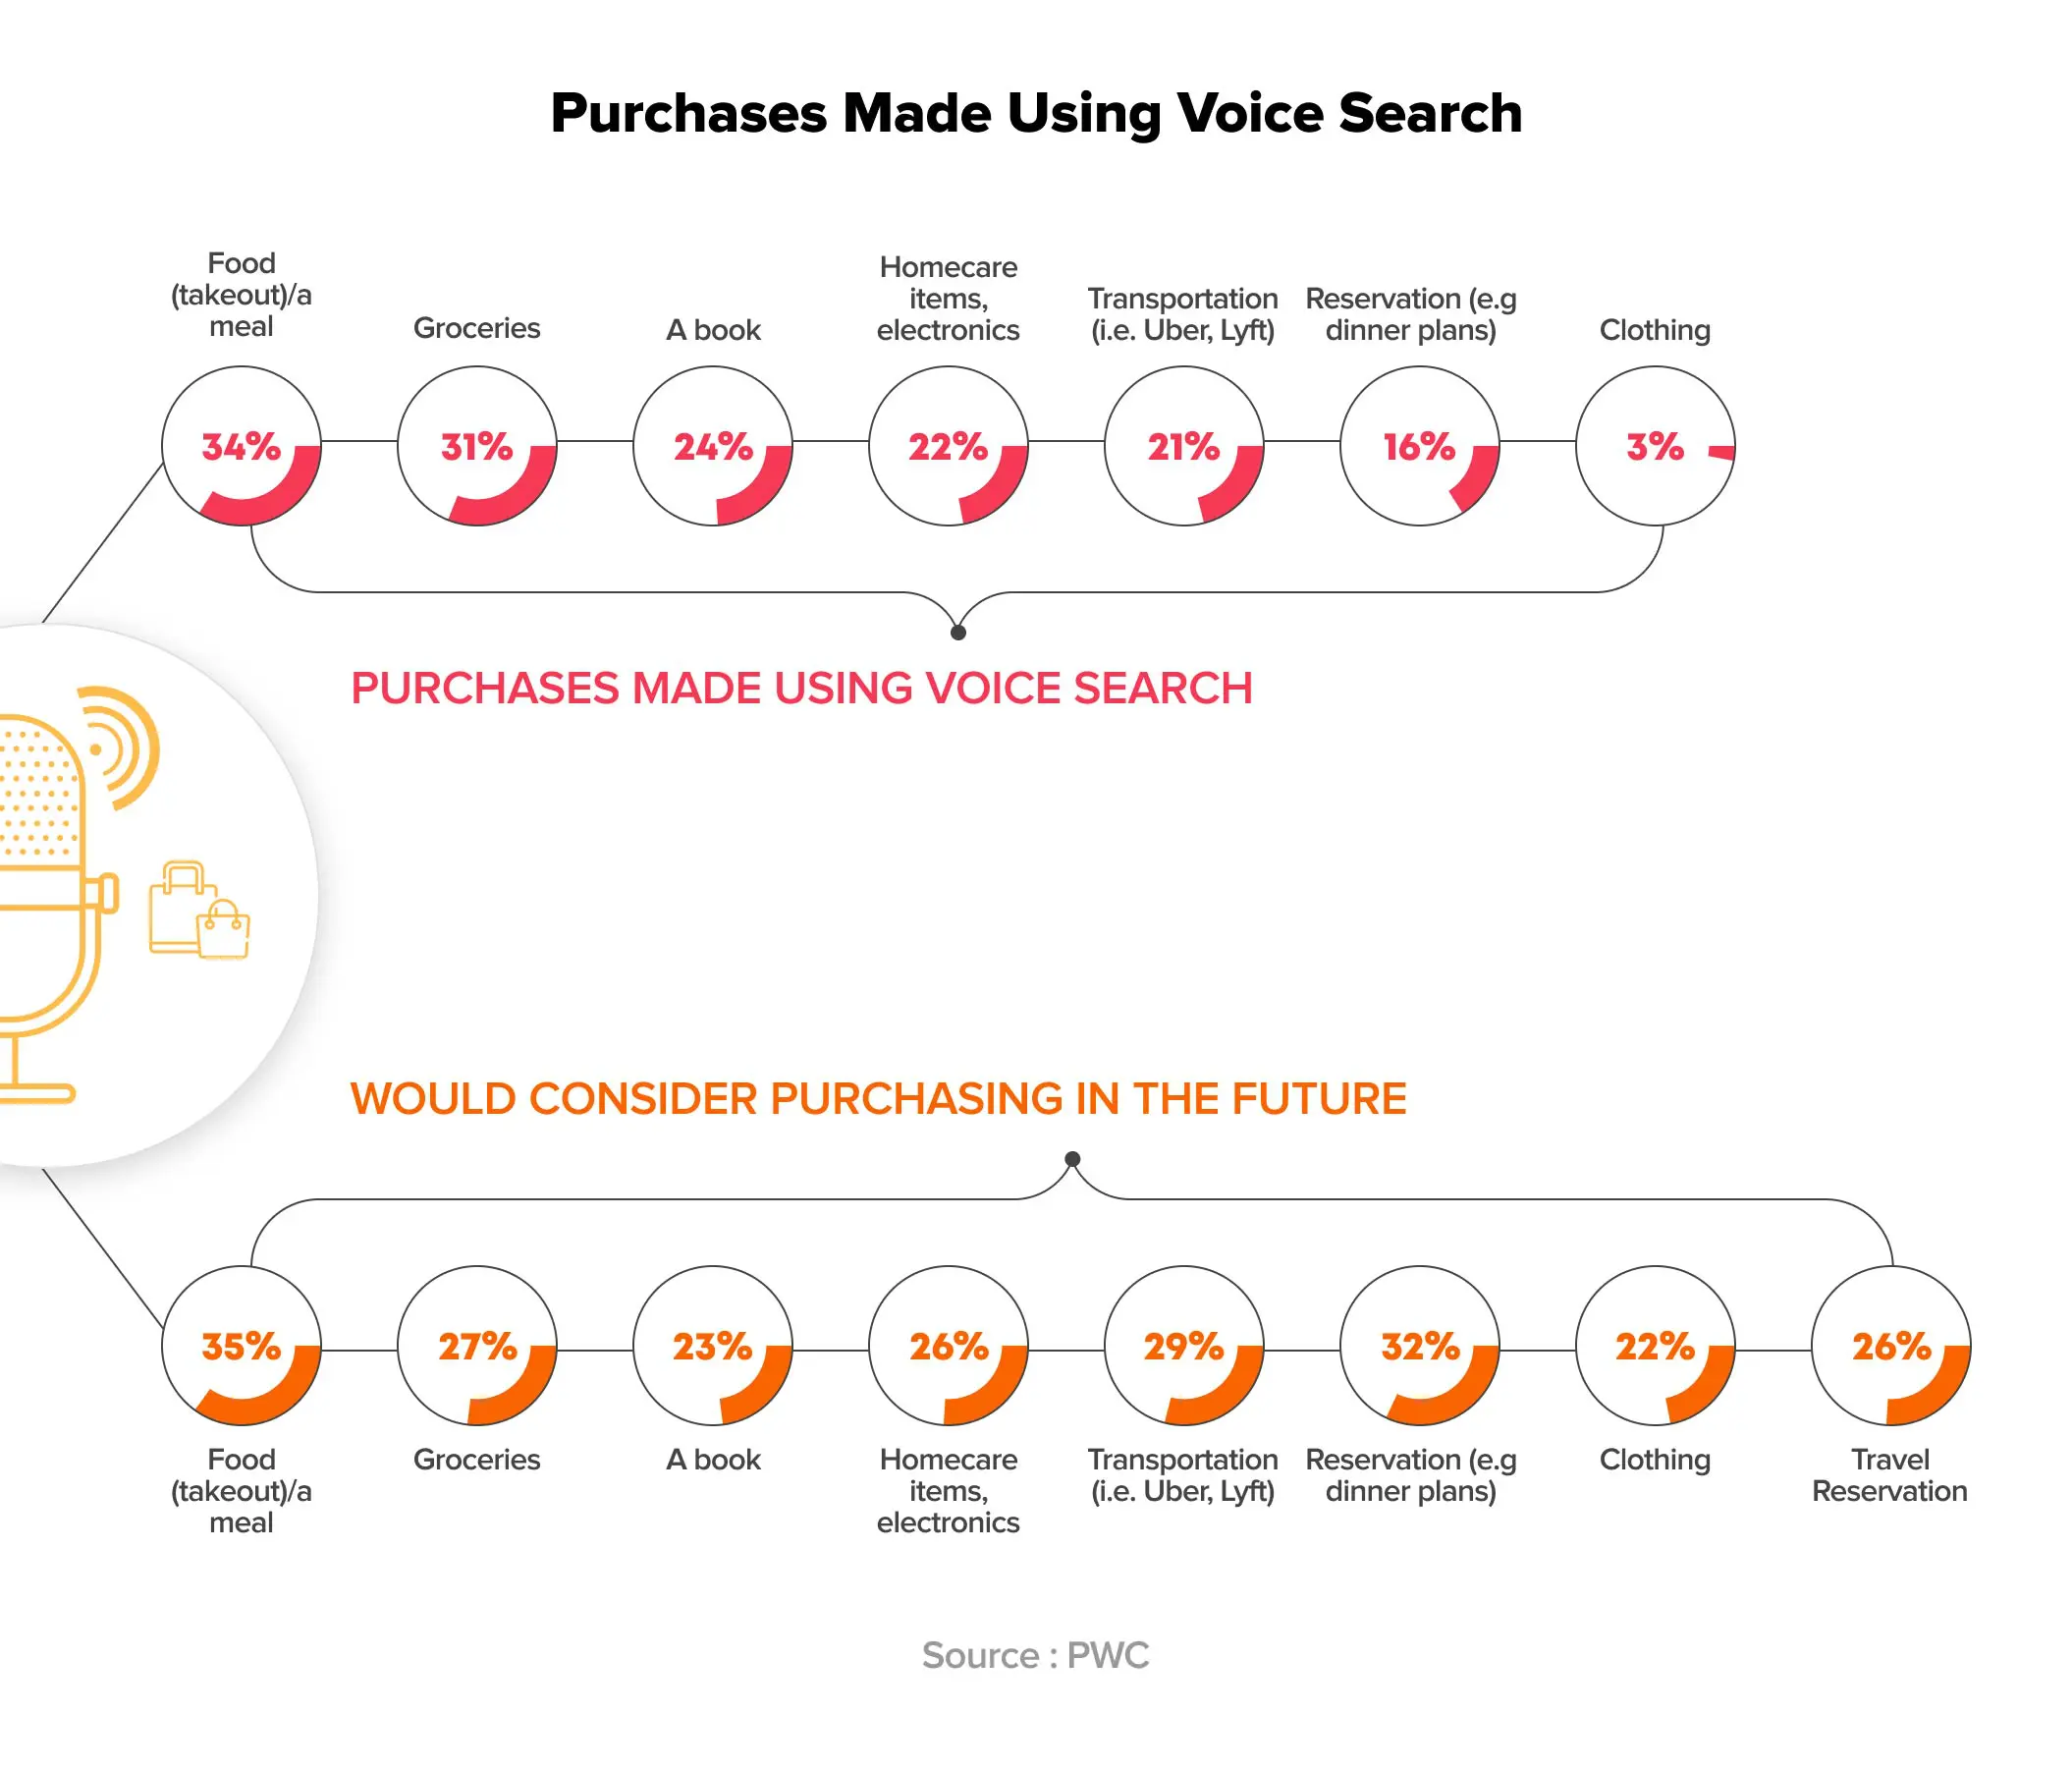 How many people purchase using voice search - a study by PWC